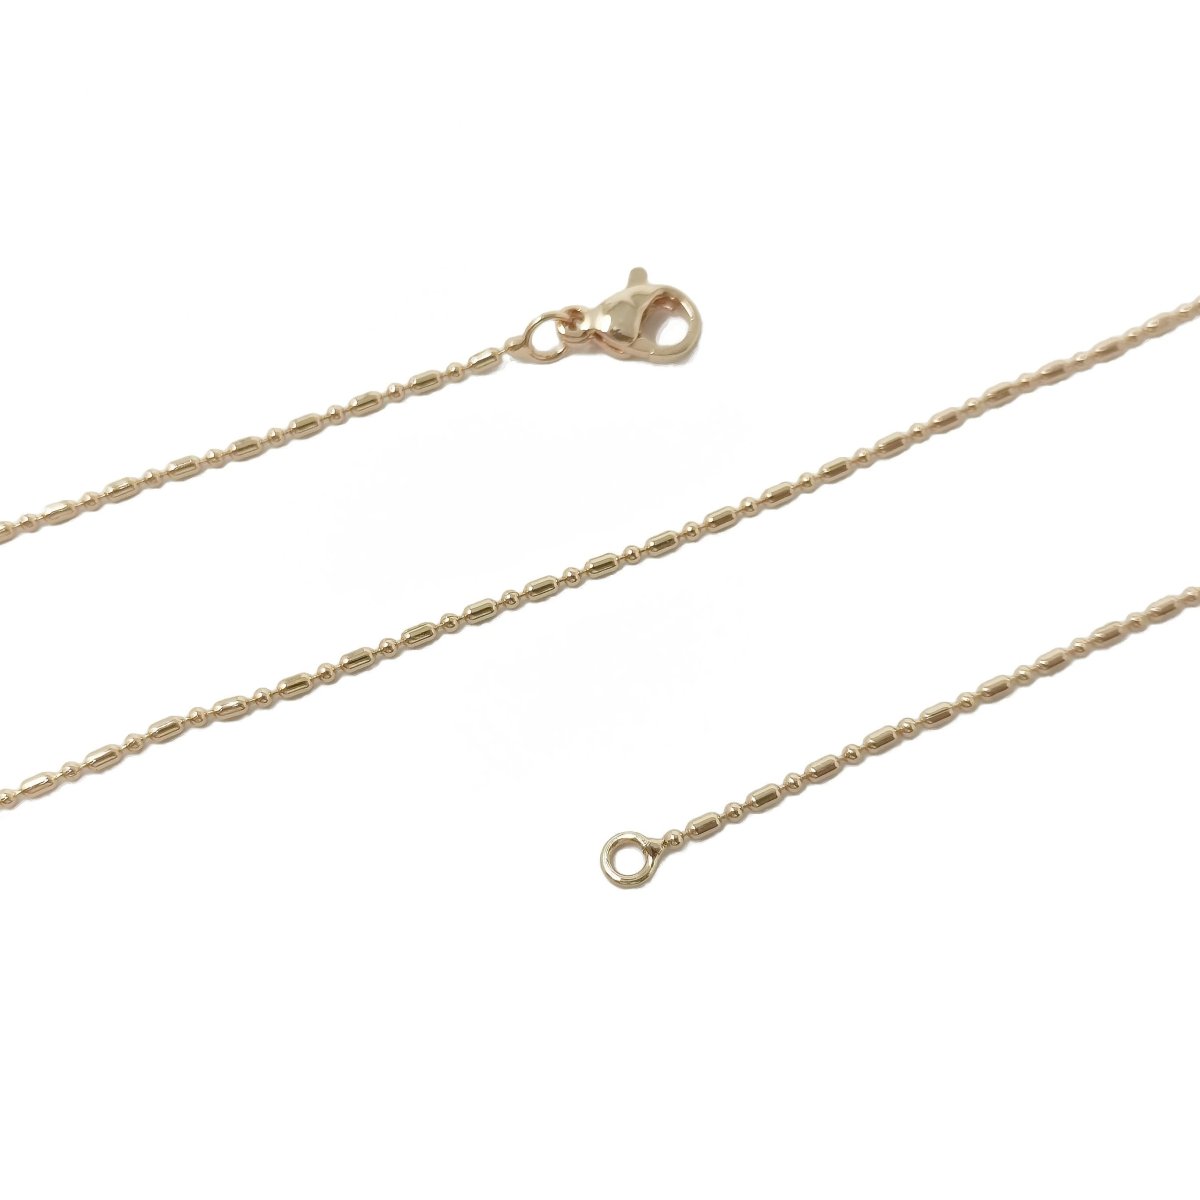 16, 17.8, 19.8 Inches Gold Filled Bead Necklace - 1.2mm, 14K Gold Filled Bead Necklace w/Lobster Clasps | CN-903, CN-904, CN-905 Clearance Pricing - DLUXCA